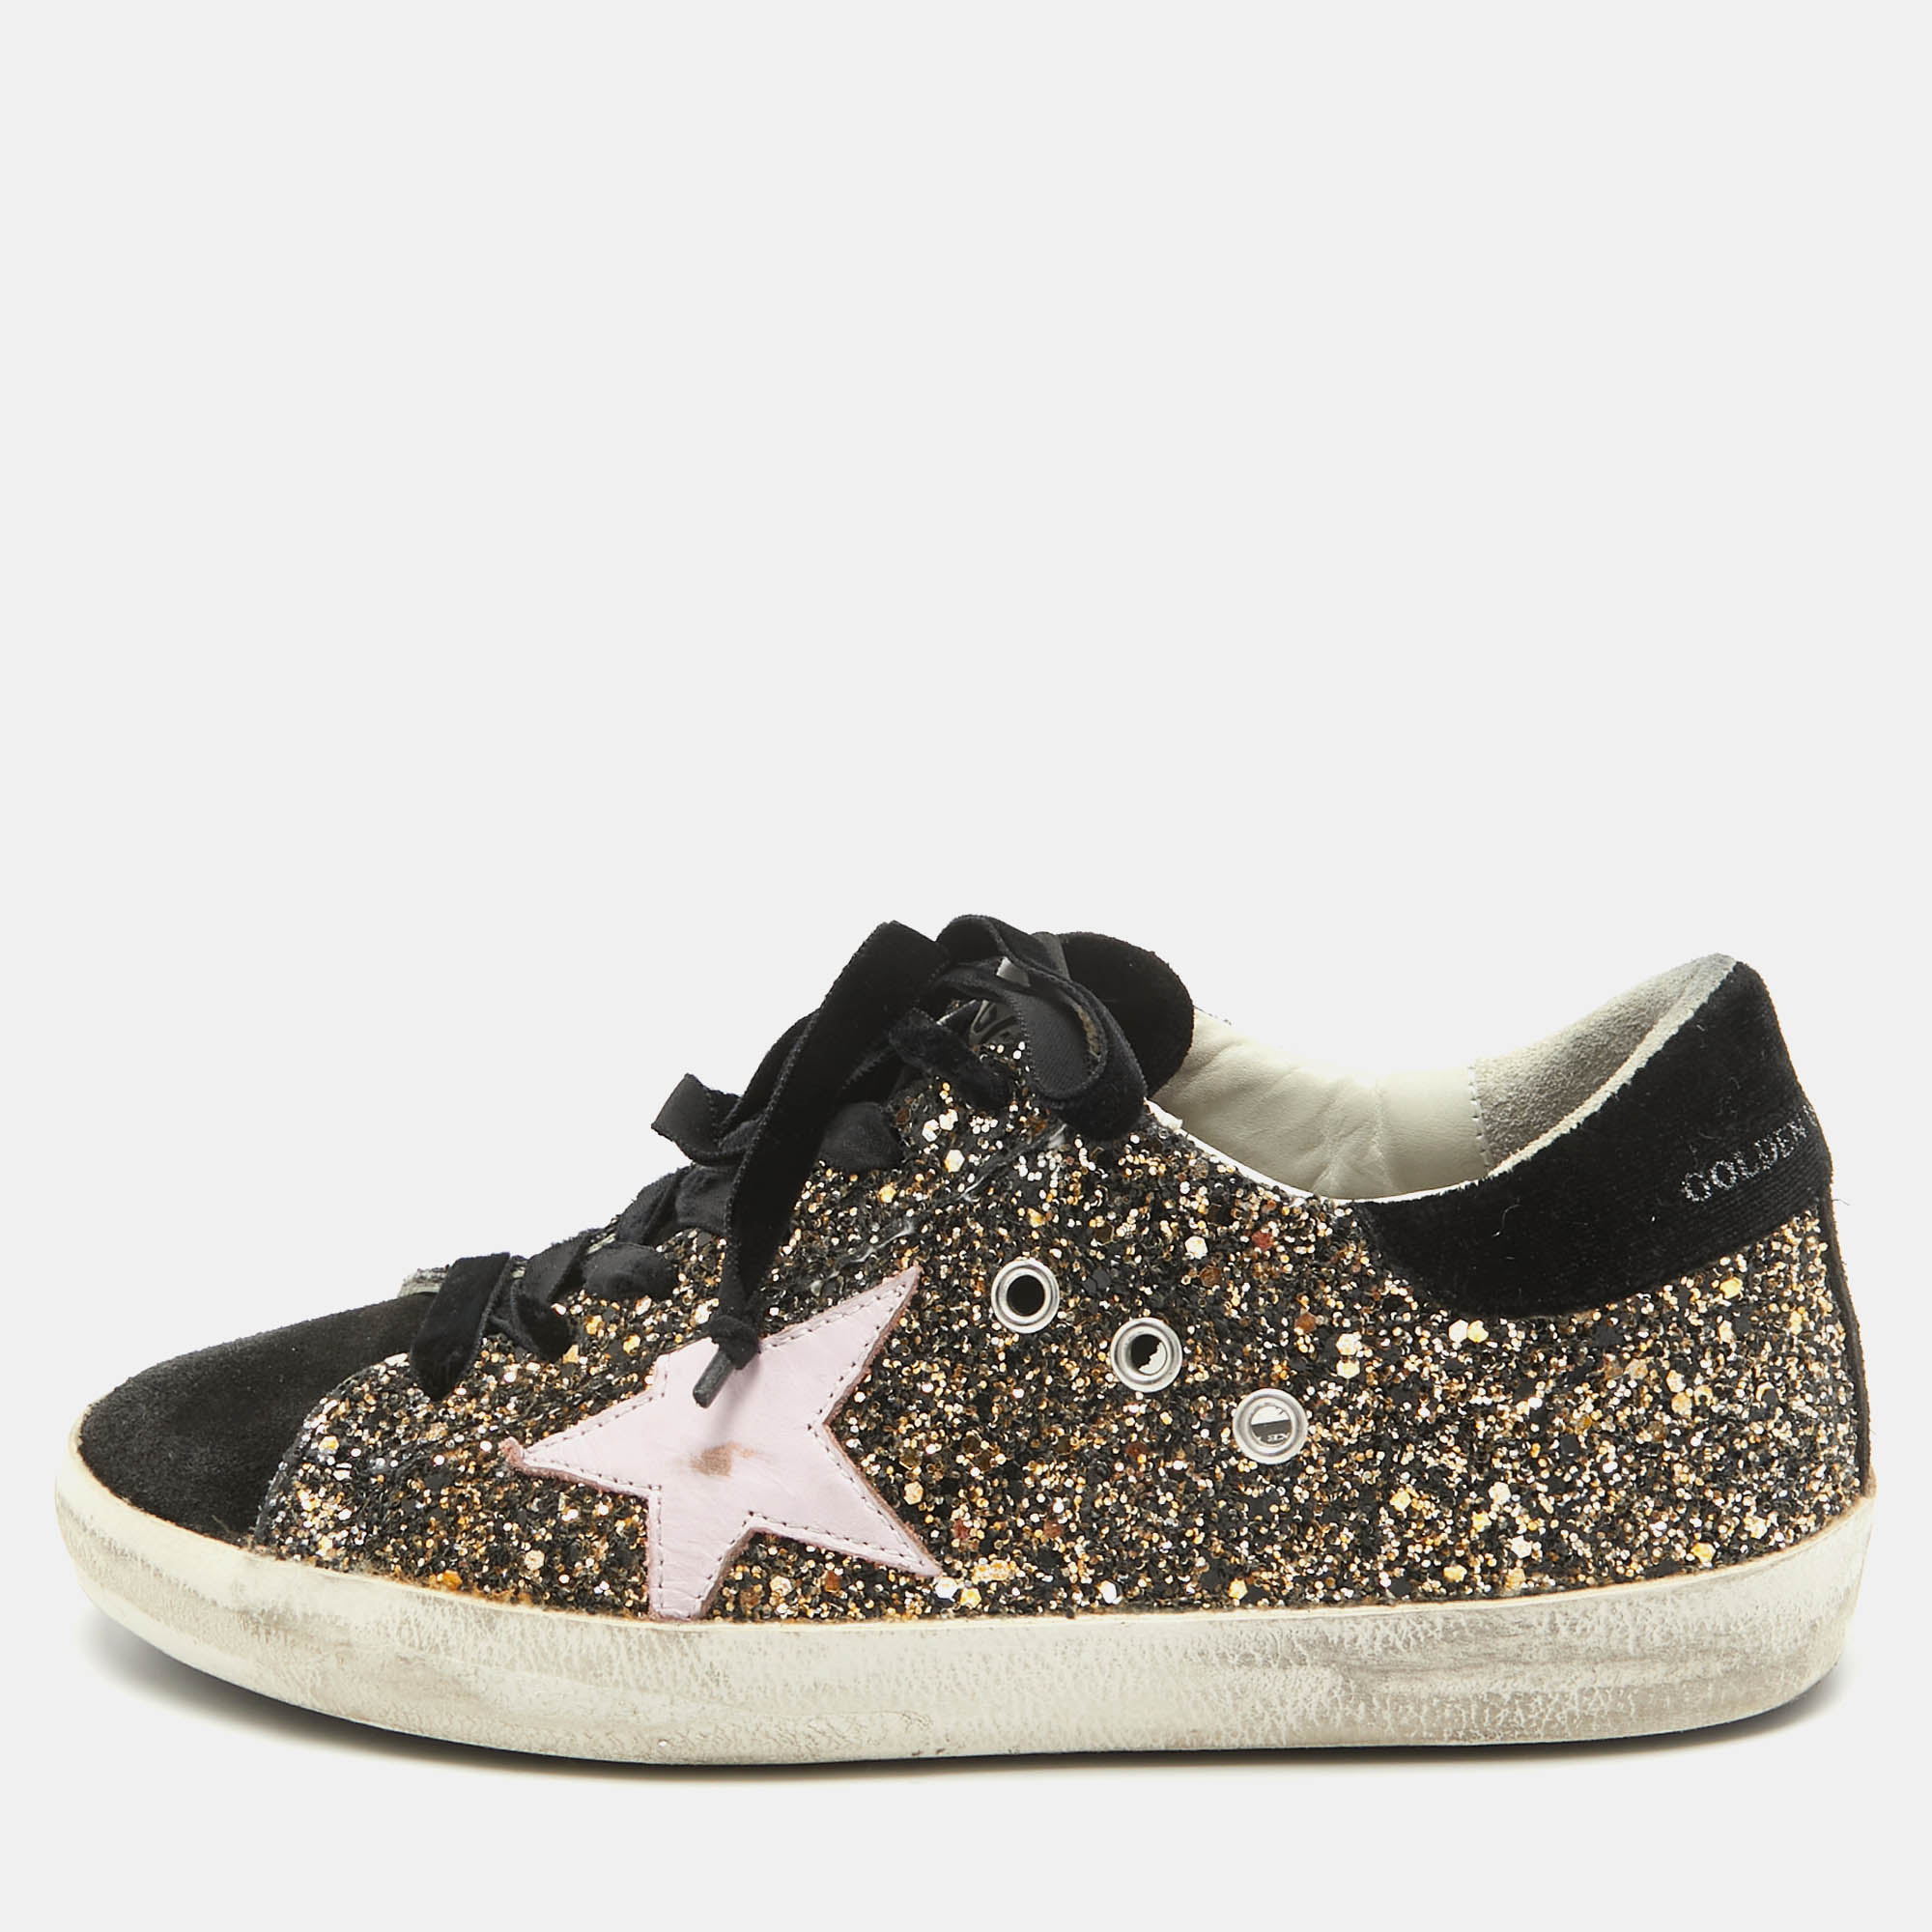 Golden goose gold/black glitter and suede superstar sneakers size 37